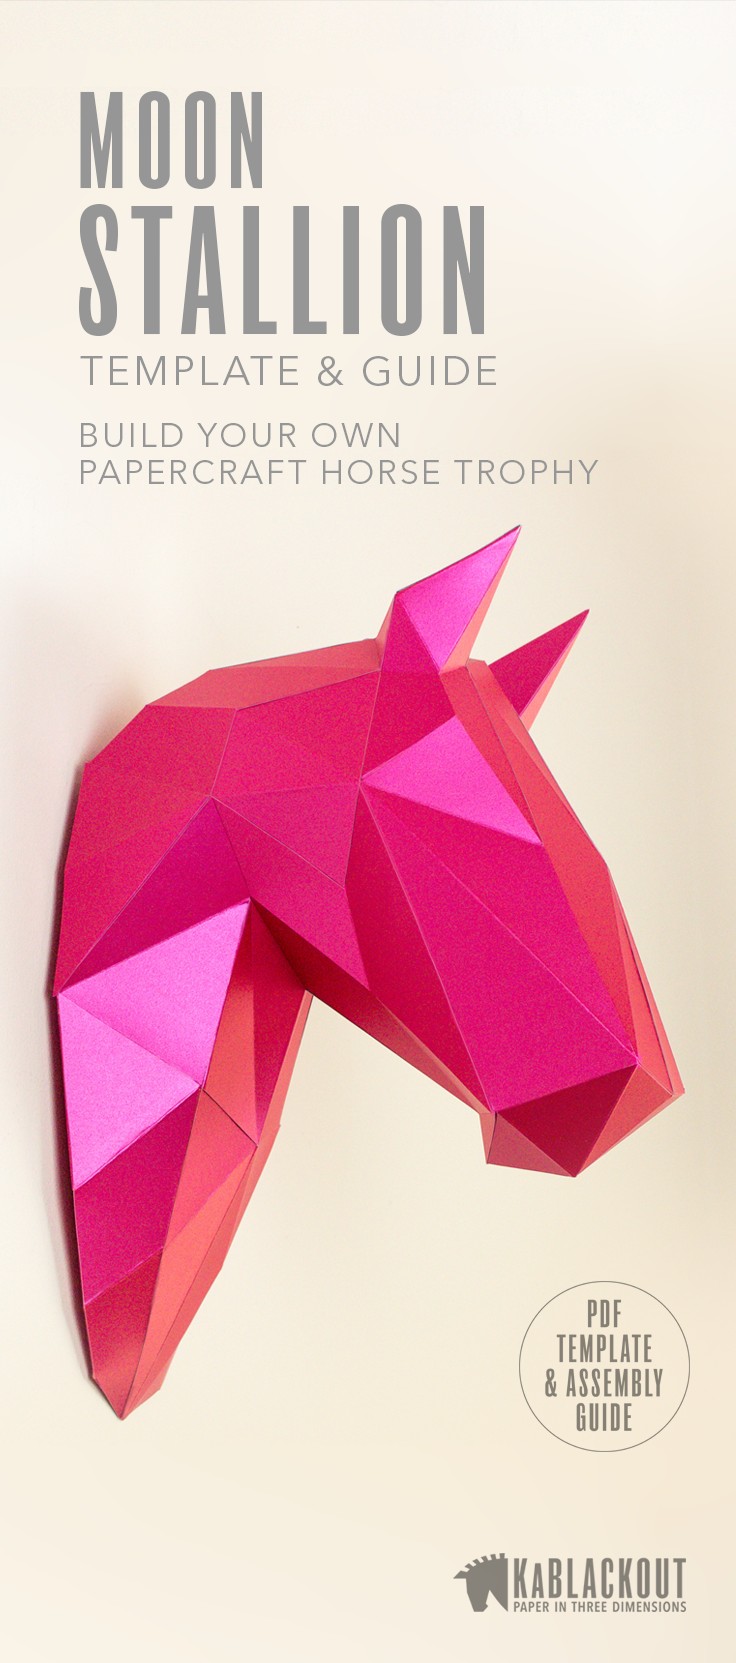 Papercraft origami Horse Papercraft Diy Horse Template Low Poly Horse 3d Wall Trophy